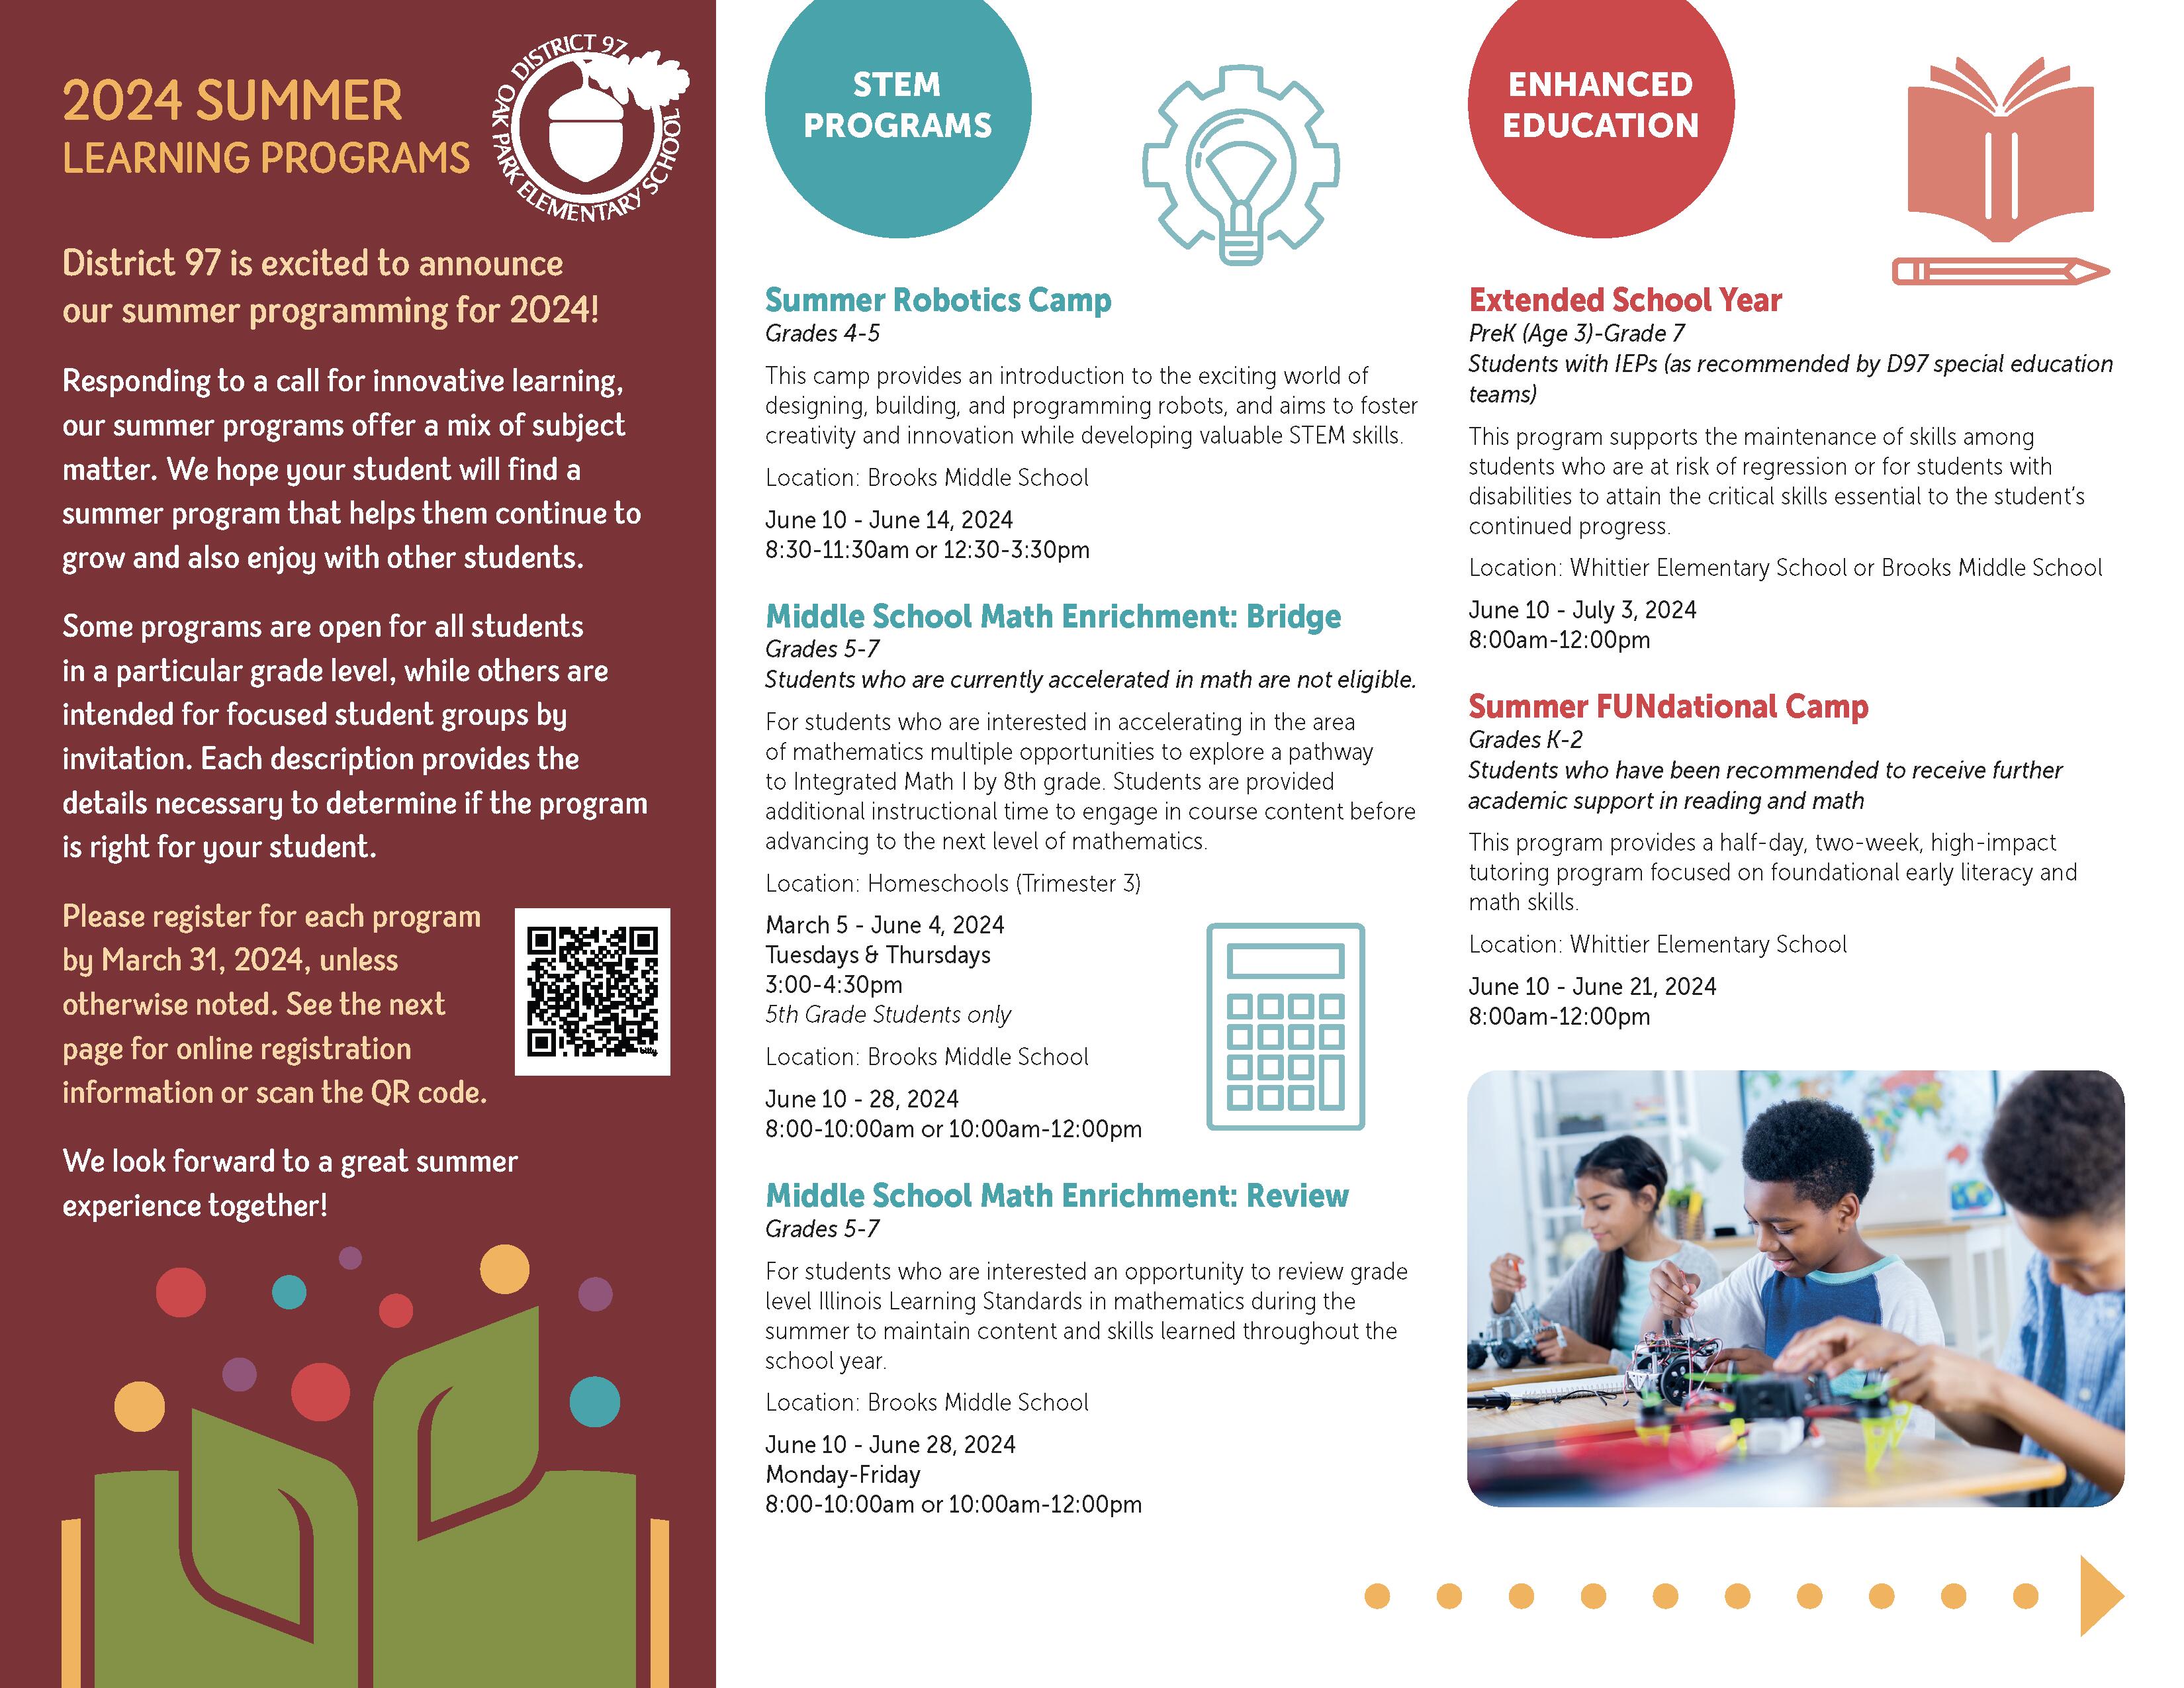 CLICK to view 2024 Summer Learning Programs (English)